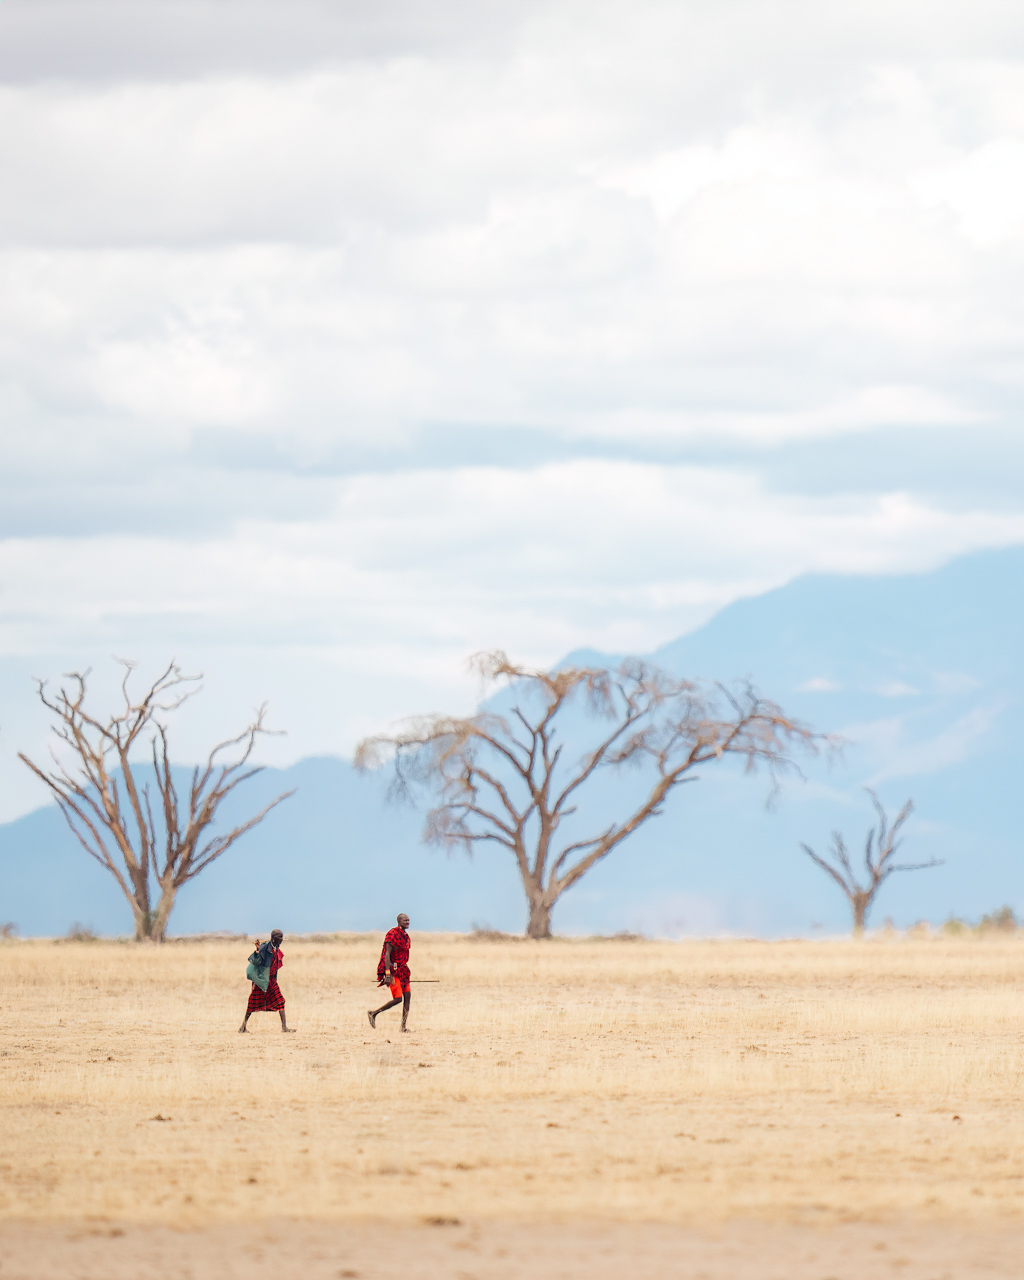 There are all kinds of new neighbours, like these Maasai